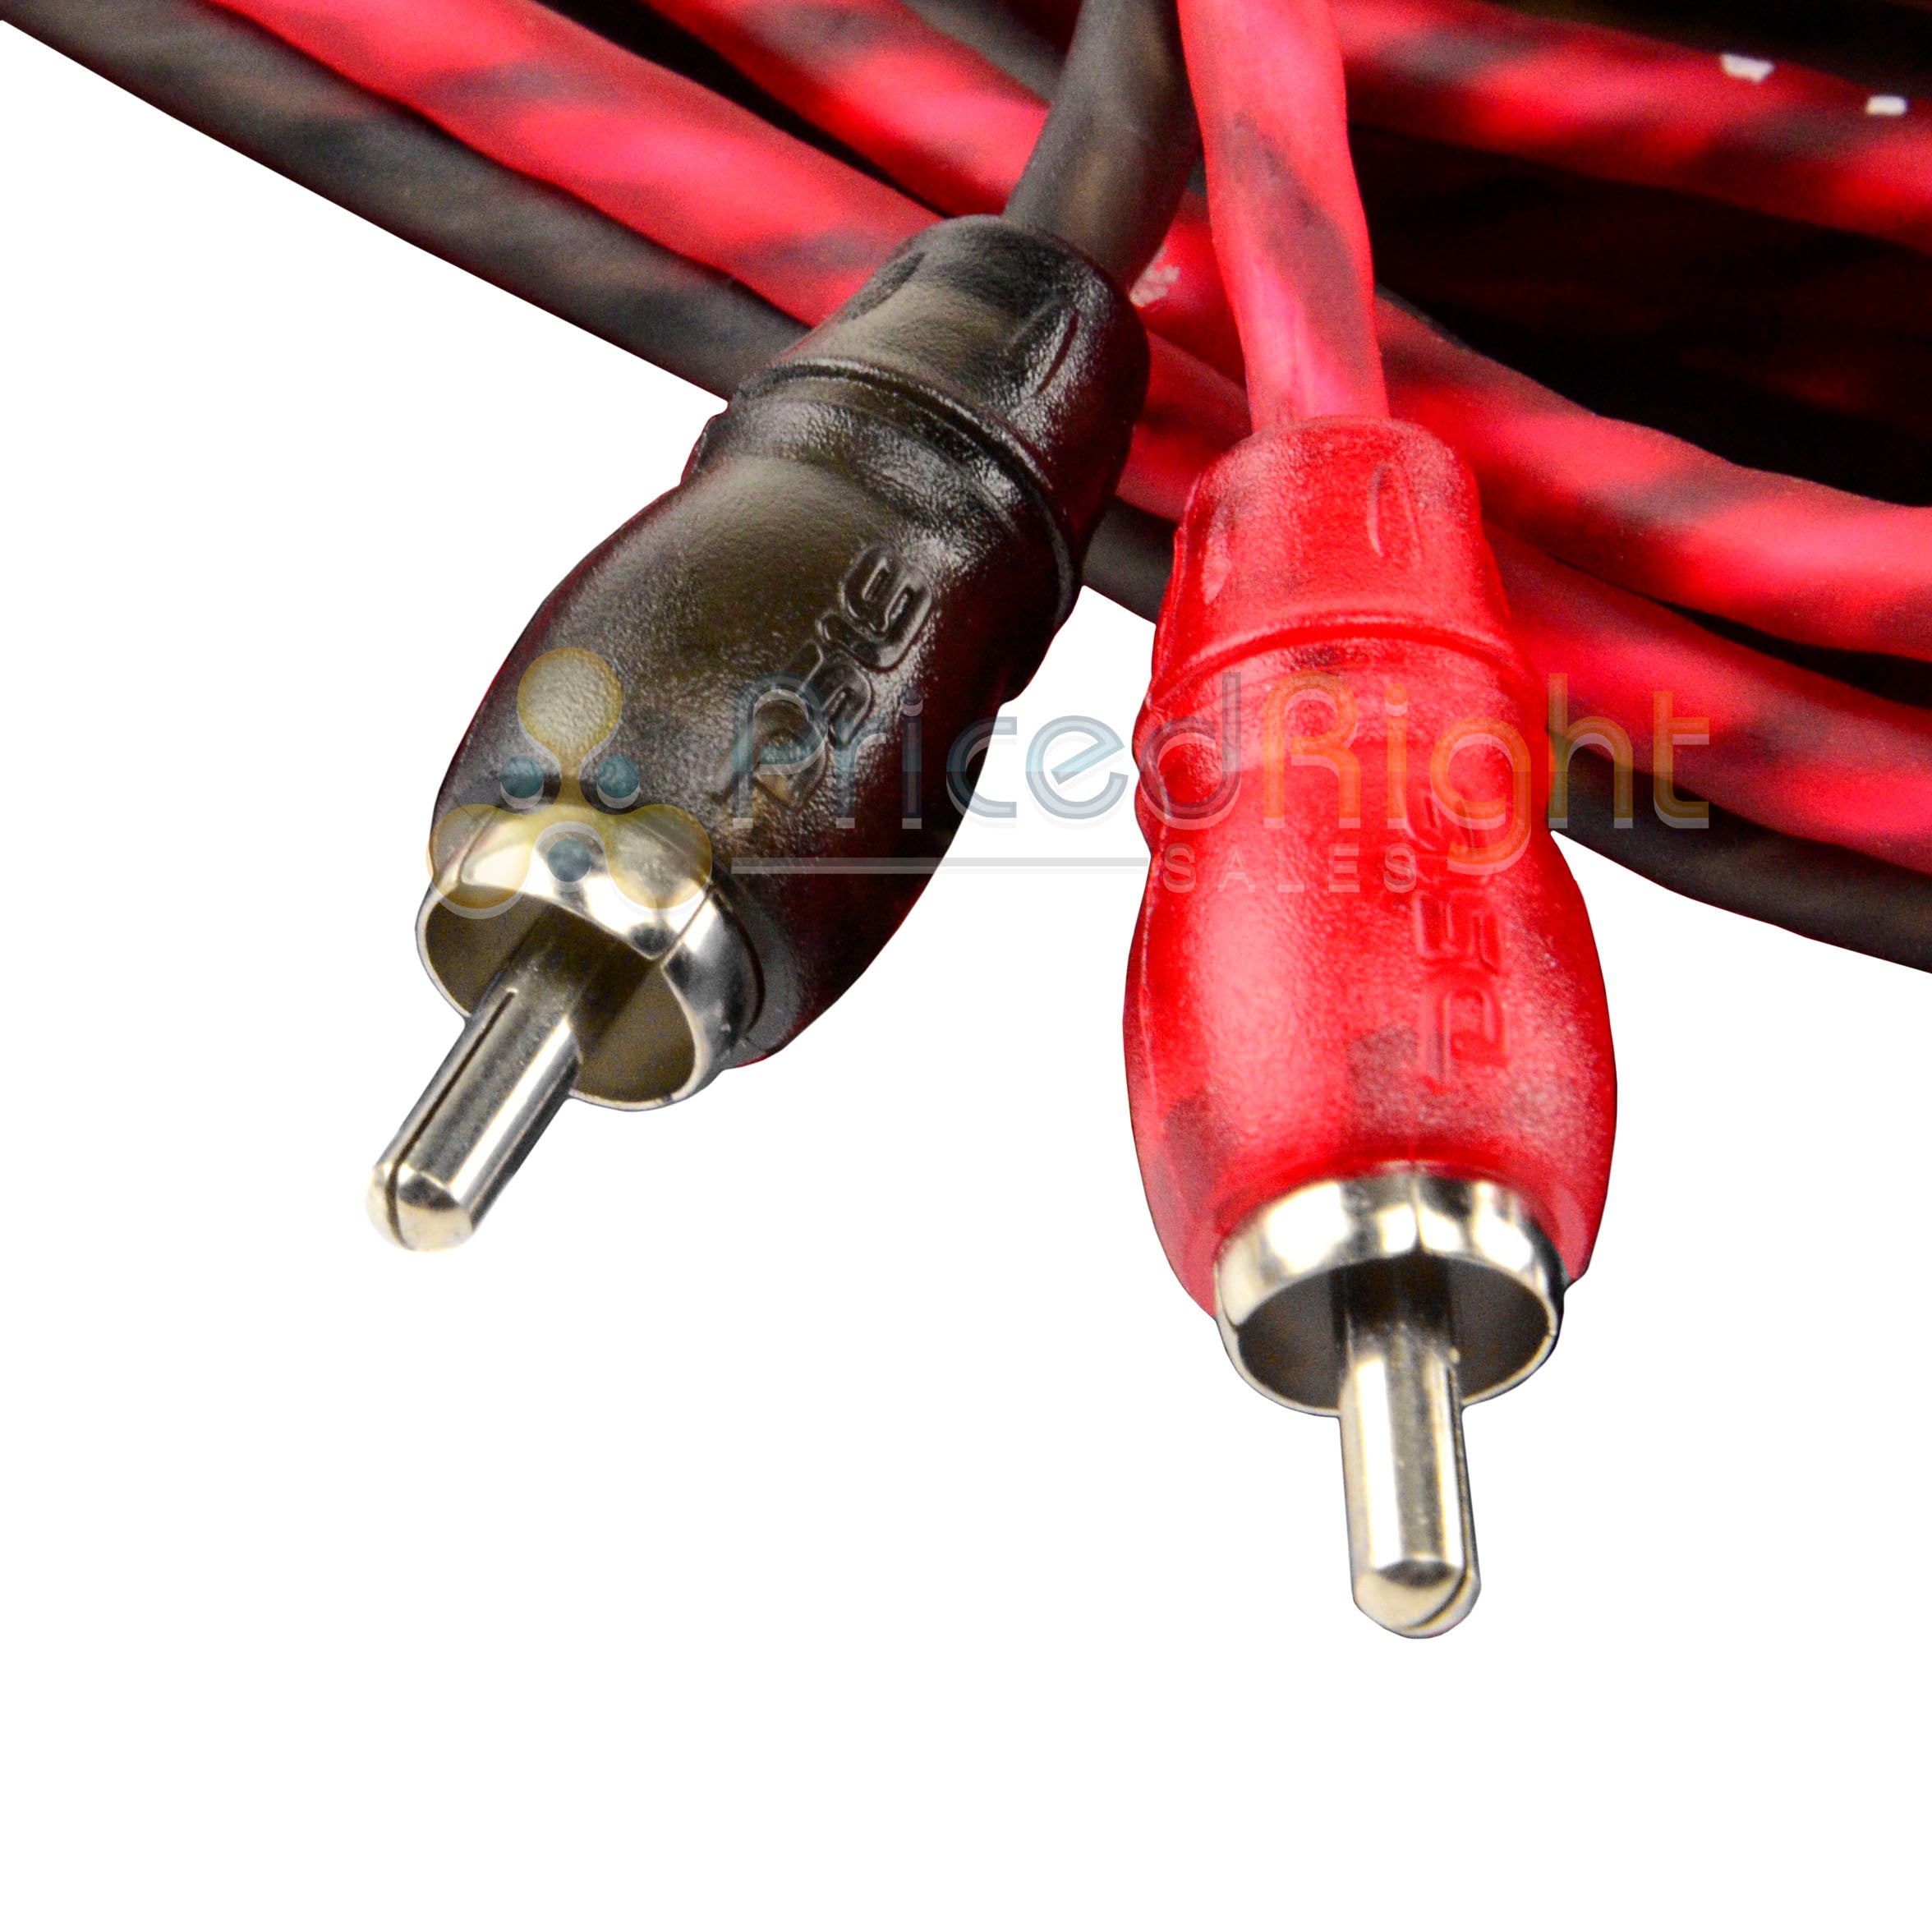 DS18 2 Pack 3 Ft 2 Channel Twisted Premium Audio Interconnect RCA Cable Pack